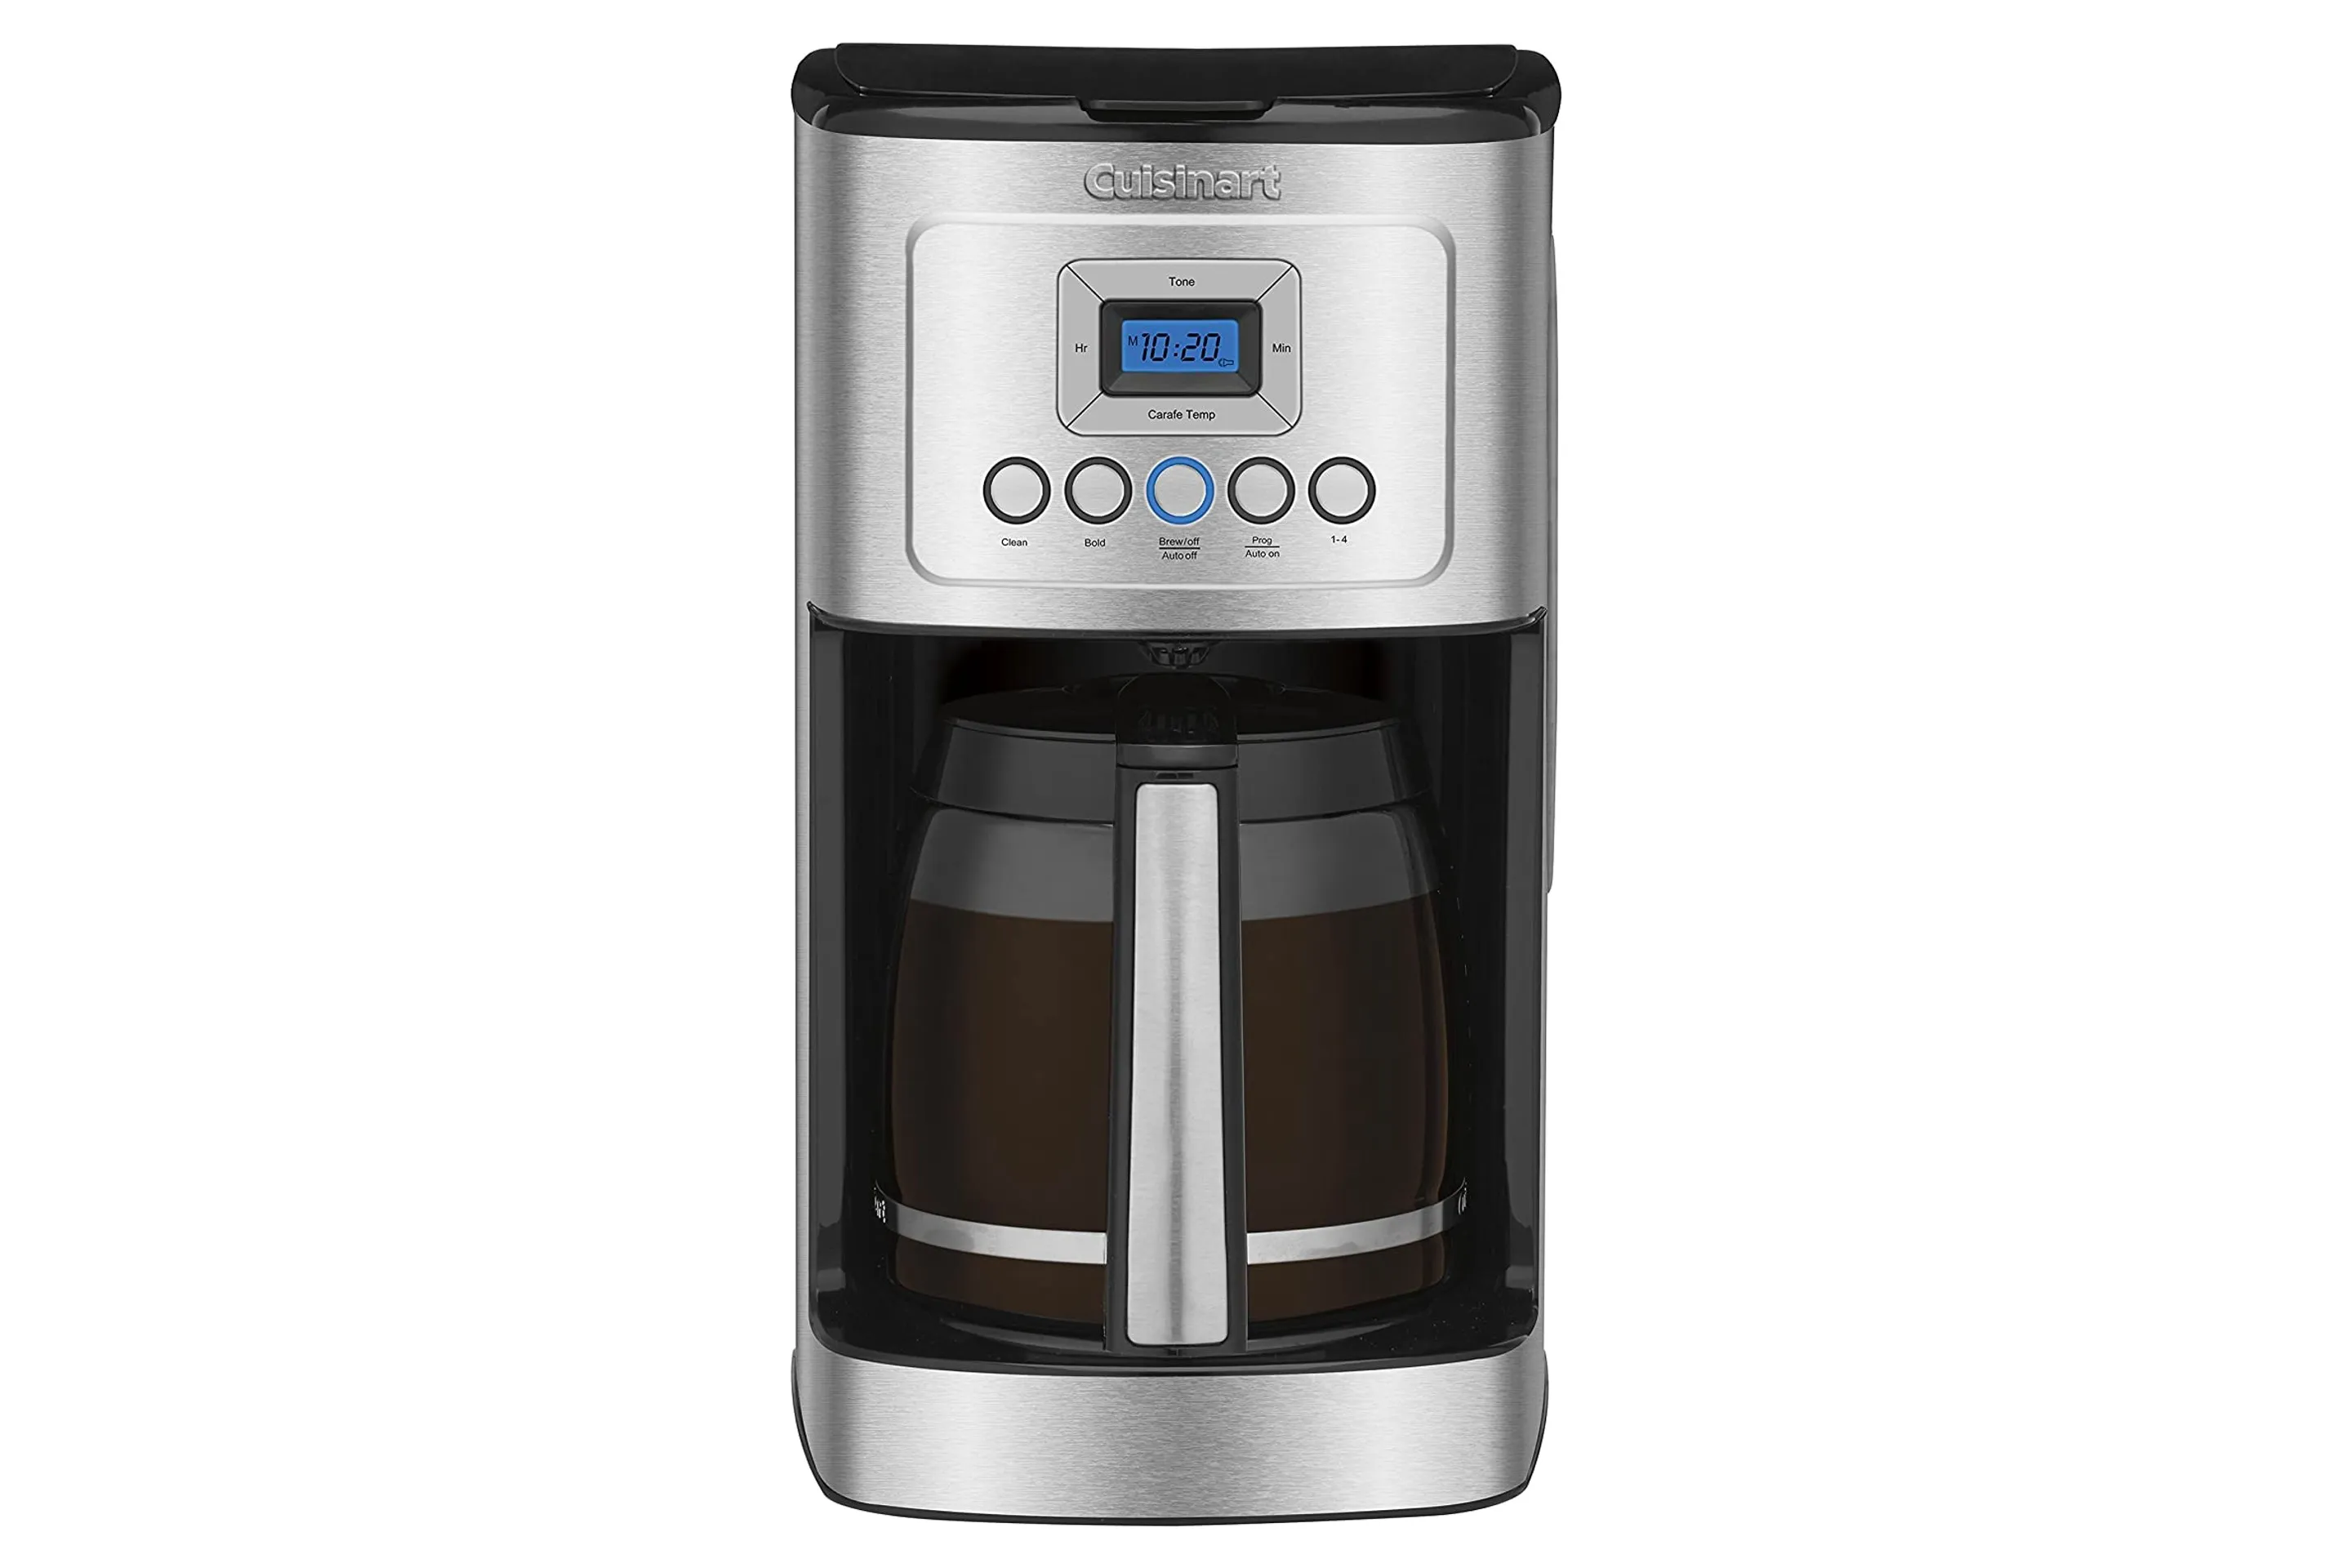 Krups Simply Brew Stainless Steel and Thermal Carafe Drip Coffee Maker 14  Cup Programmable, Customizable, Digital Display, Insulated Coffee Filter